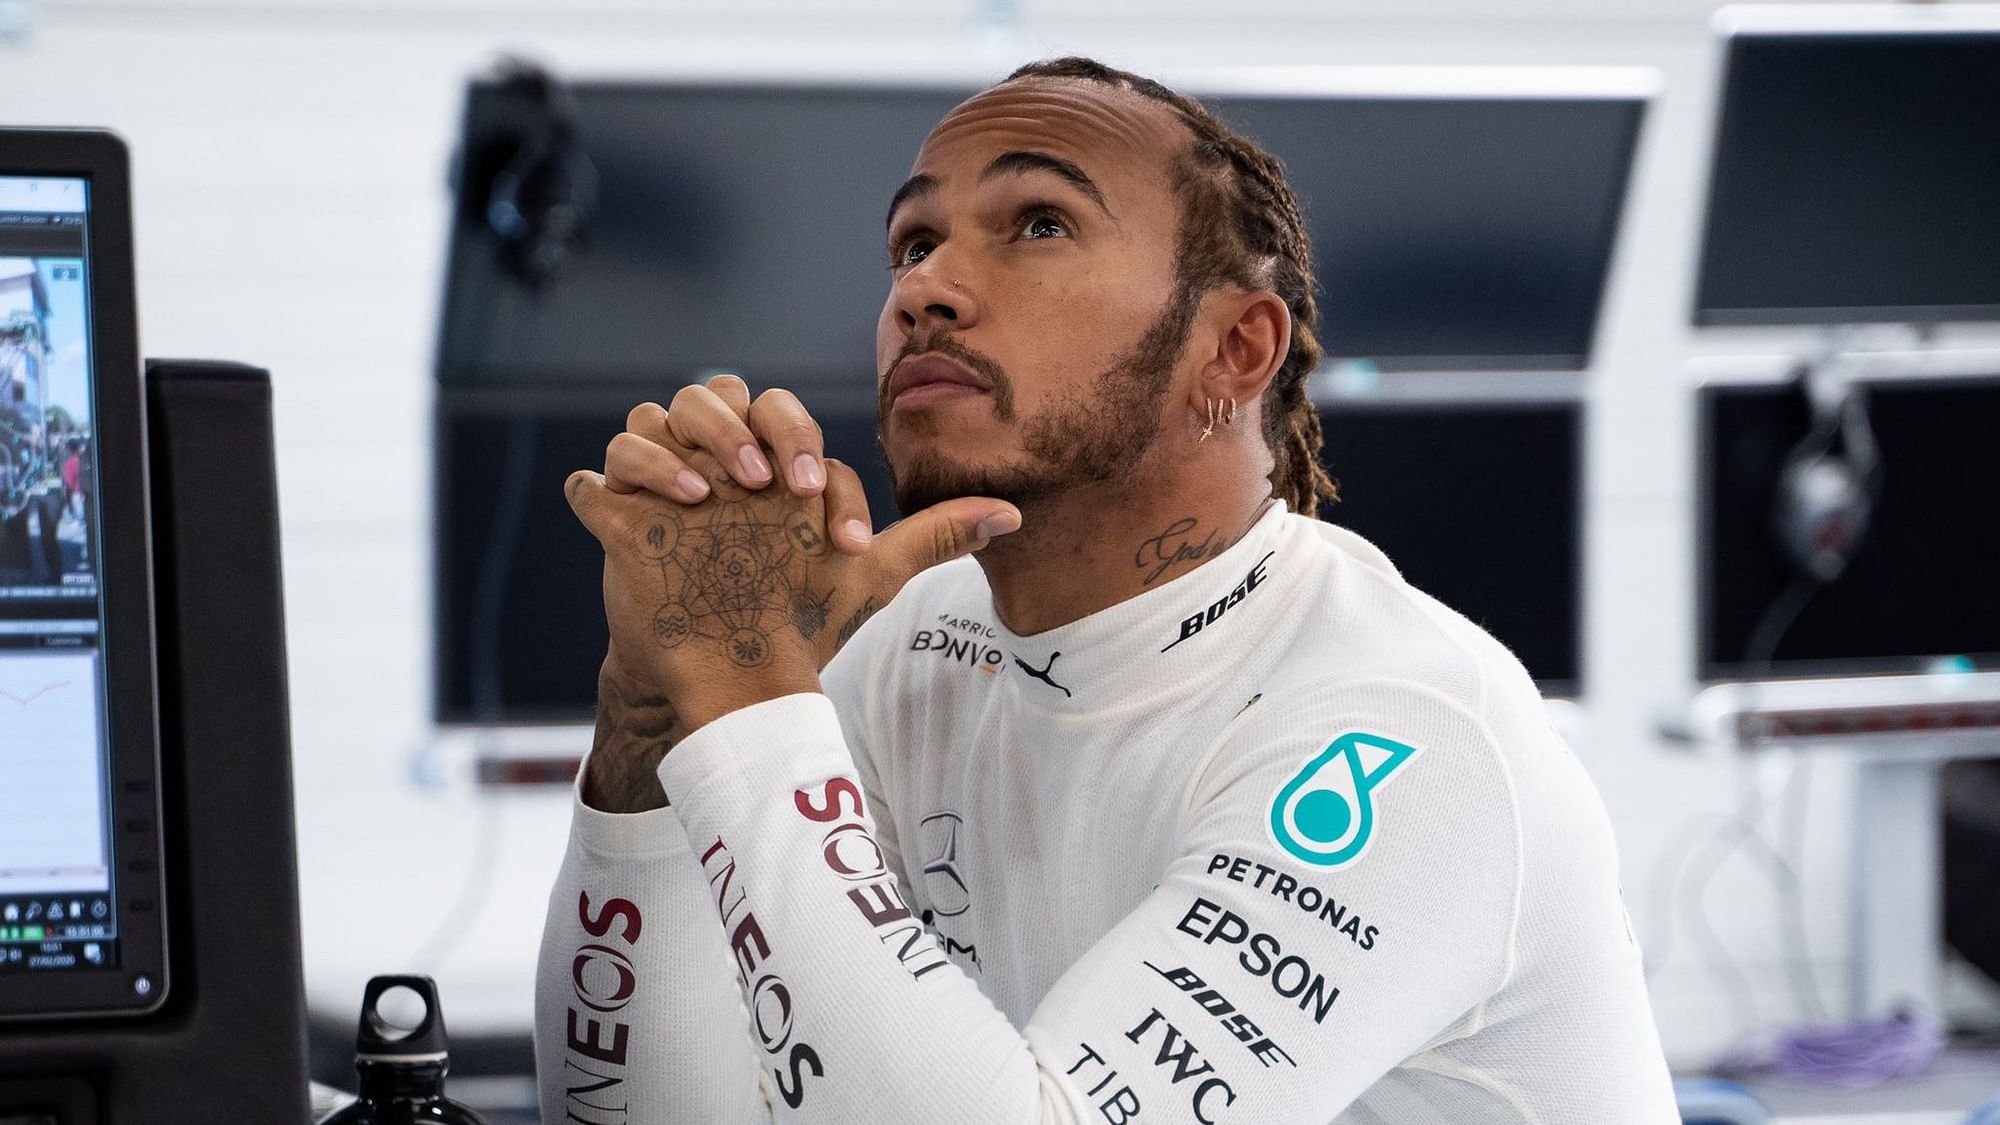 Lewis Hamilton criticised fellow F1 racers for their silence on the death of George Floyd.